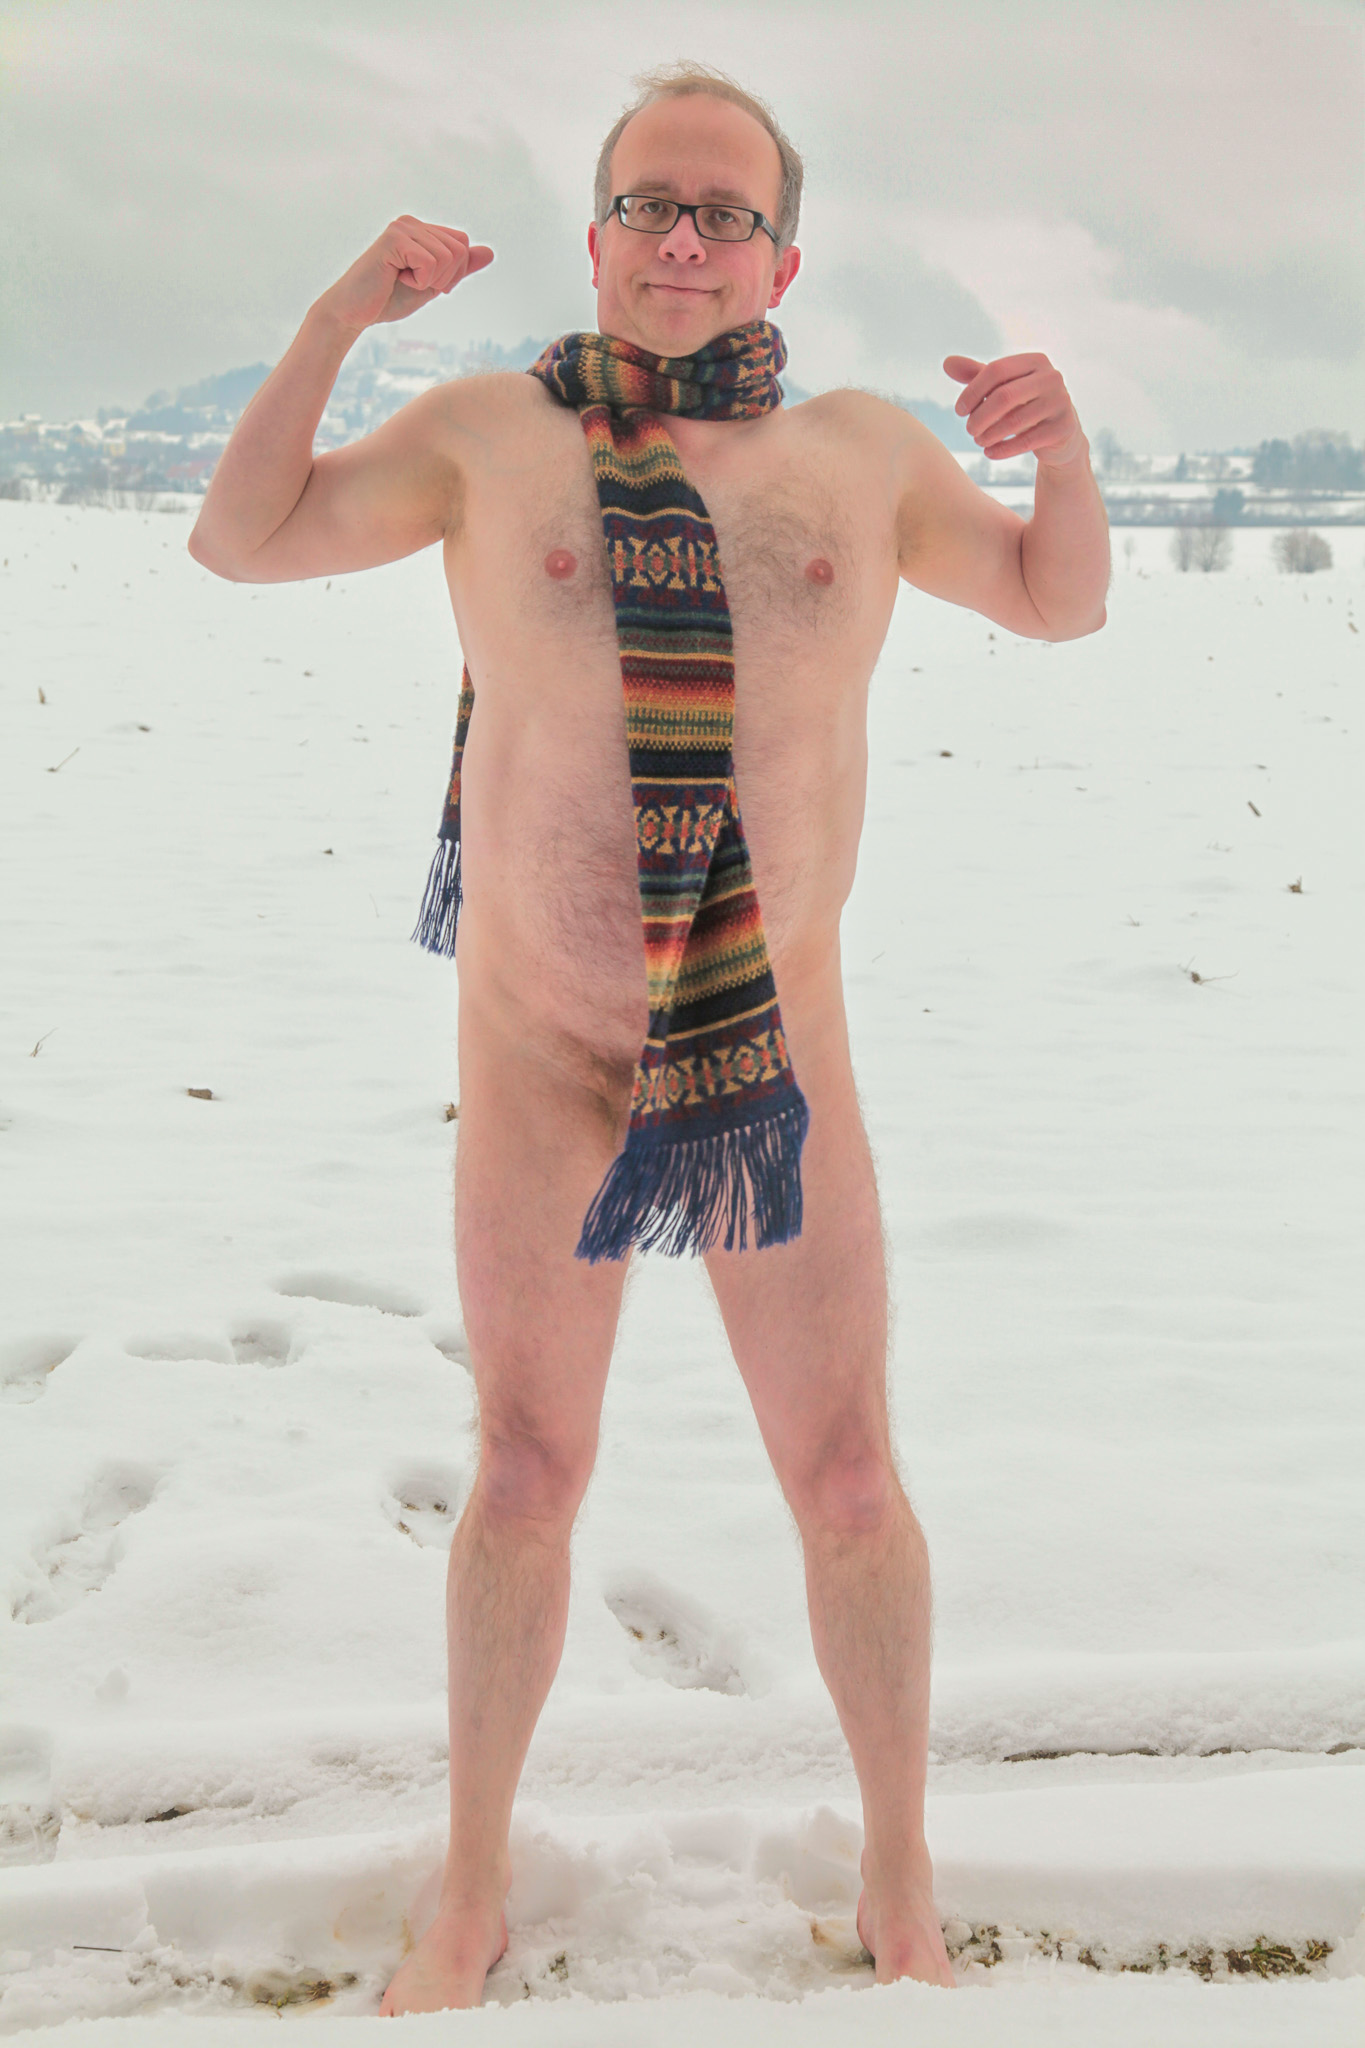 Male nude in Germany with scarf barefoot in the snow